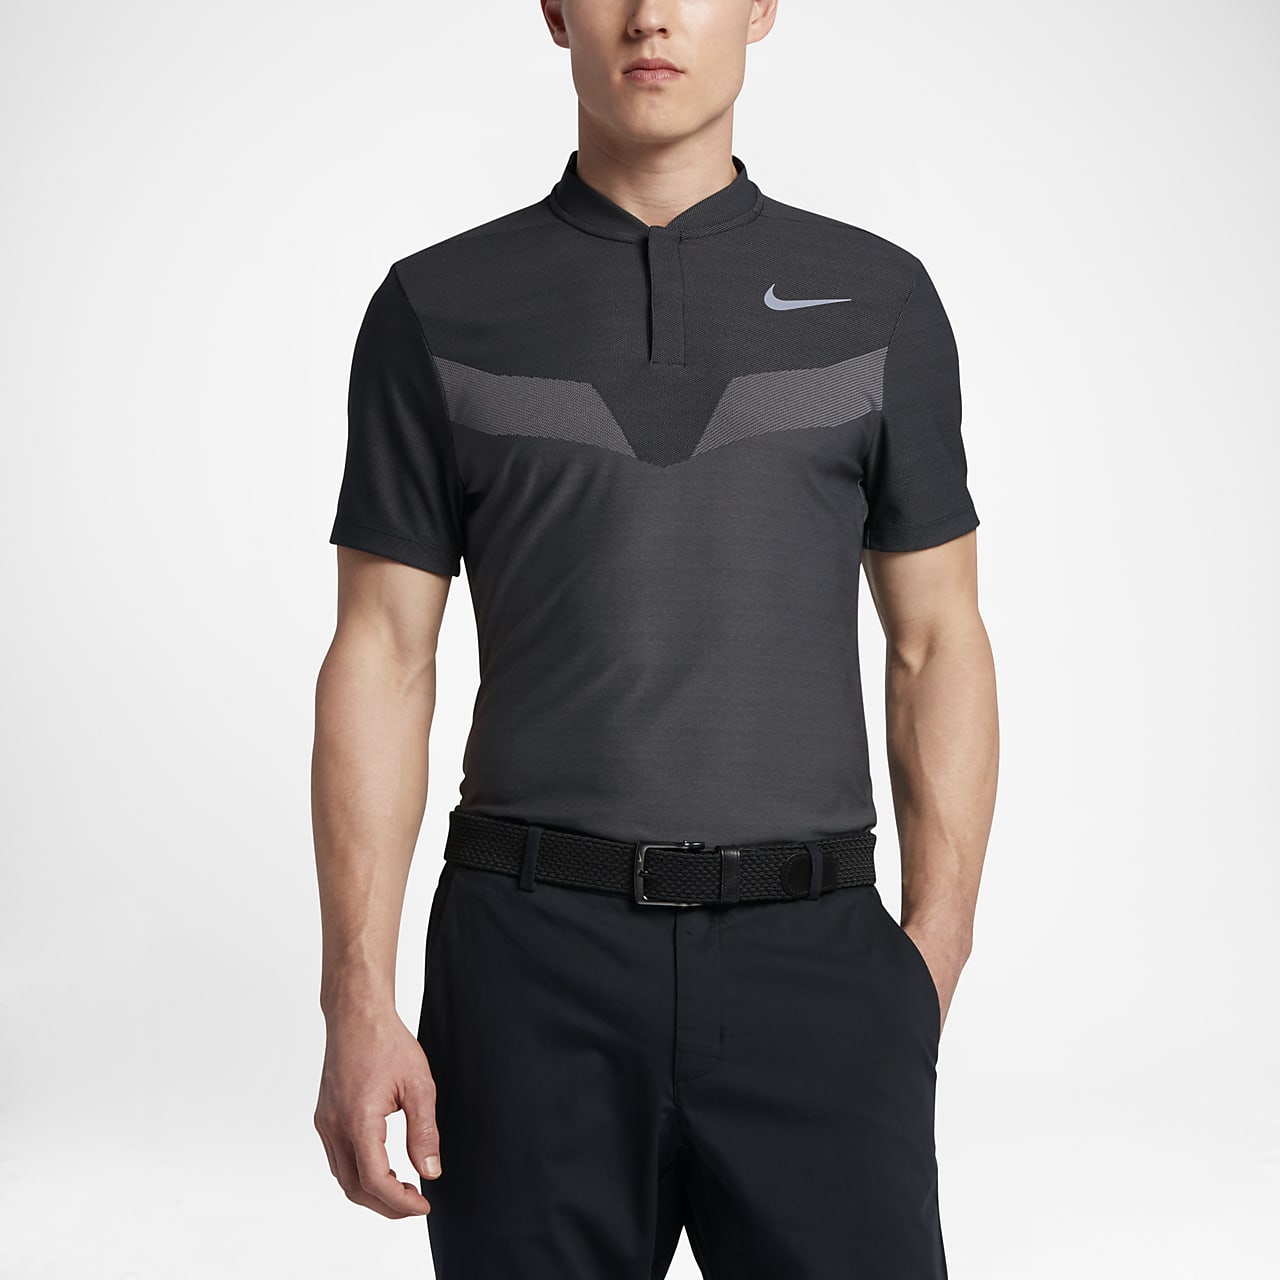 Nike Cooling Men's Slim Fit Golf Polo. VN